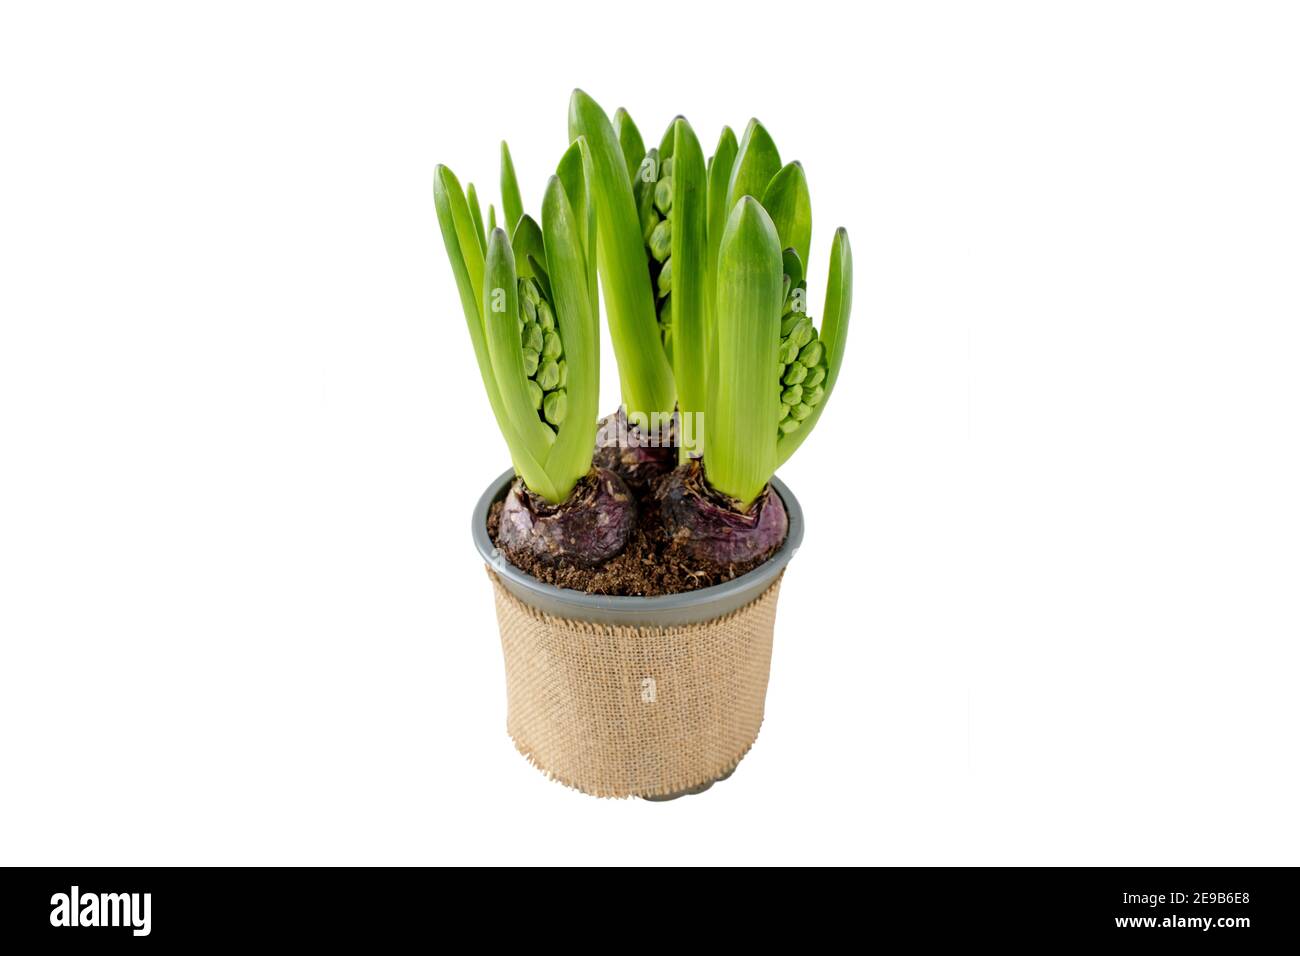 Hyacinth flower sprouts in the pot with jute canvas covering. Hyacinthus spring bulbous plant isolated on white. Stock Photo